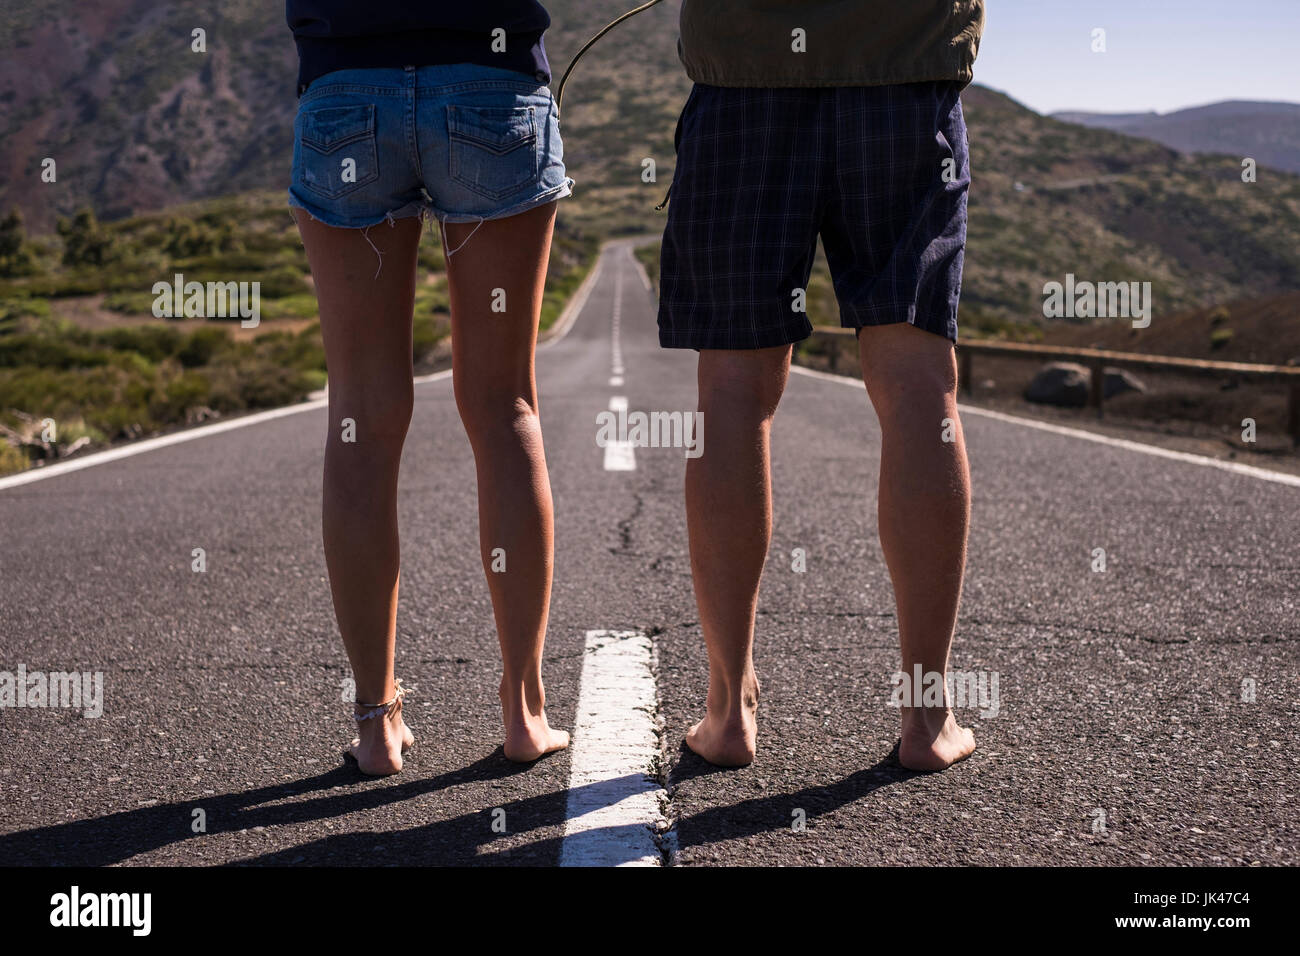 Legs of barefoot Caucasian couple standing in middle of road Stock Photo